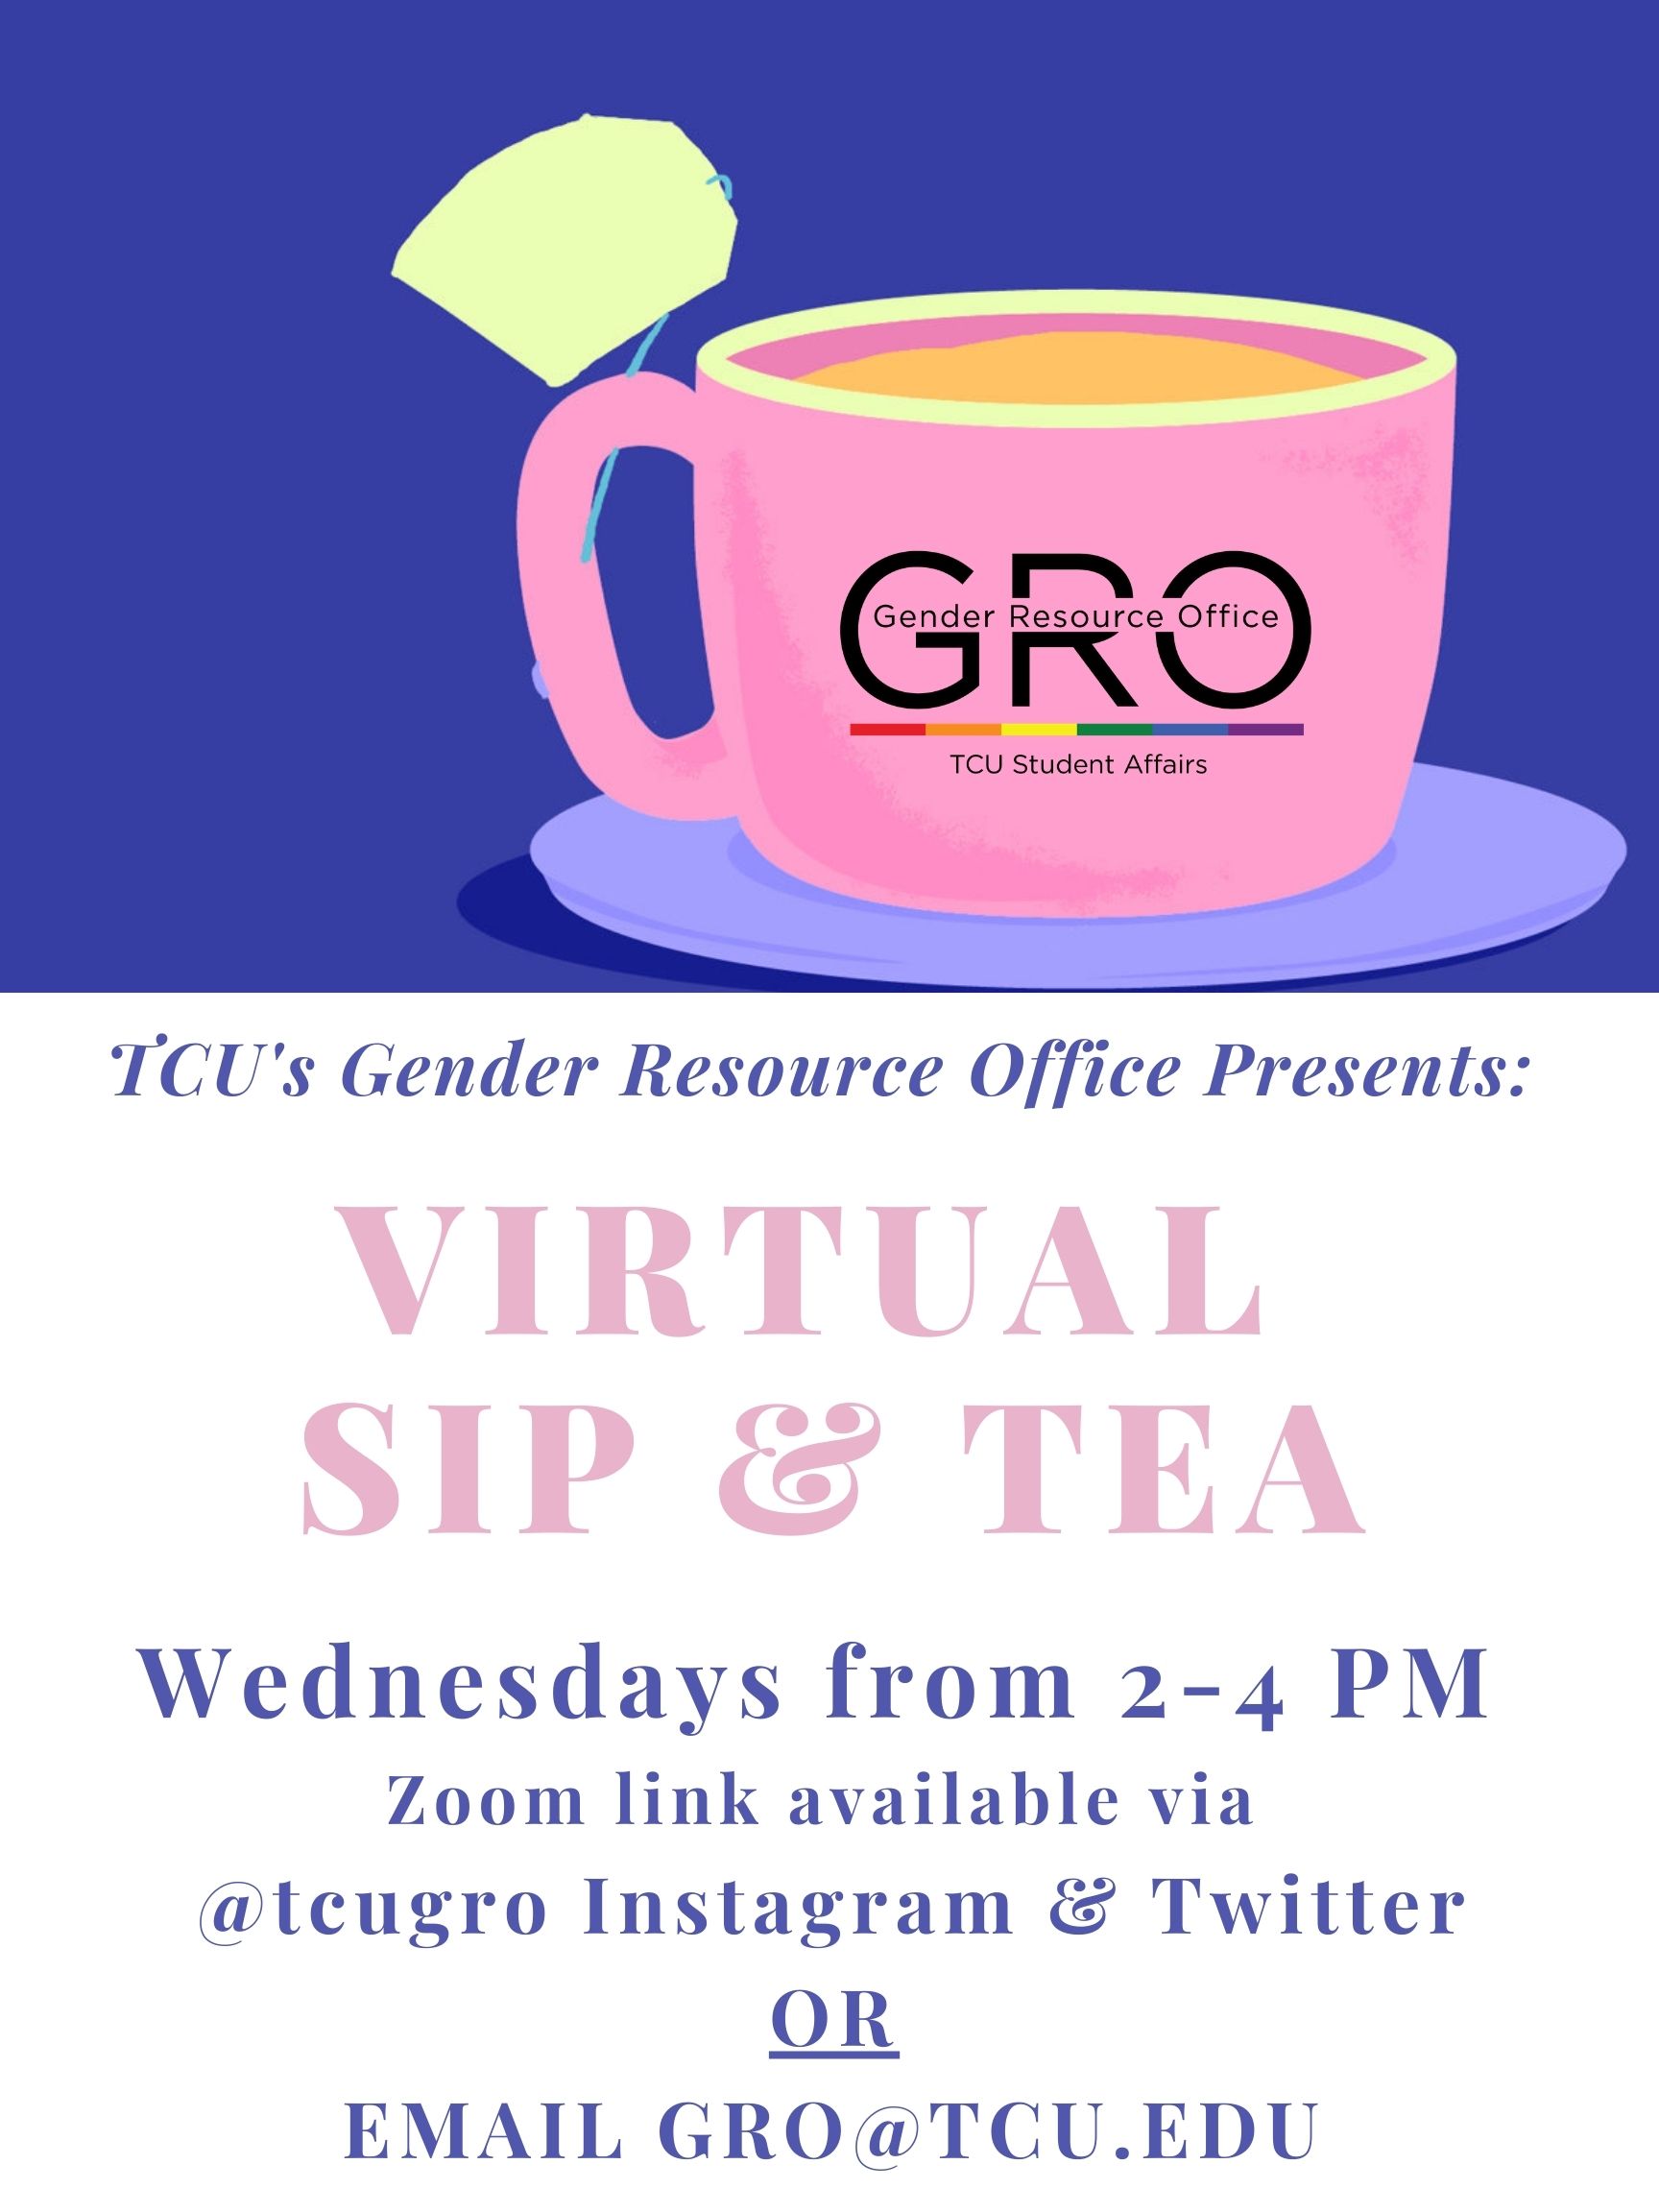 Wednesdays from 2-4 PM Zoom link available via @tcugro Instagram &amp; Twitter OR EMAIL GRO@TCU.EDU (1)